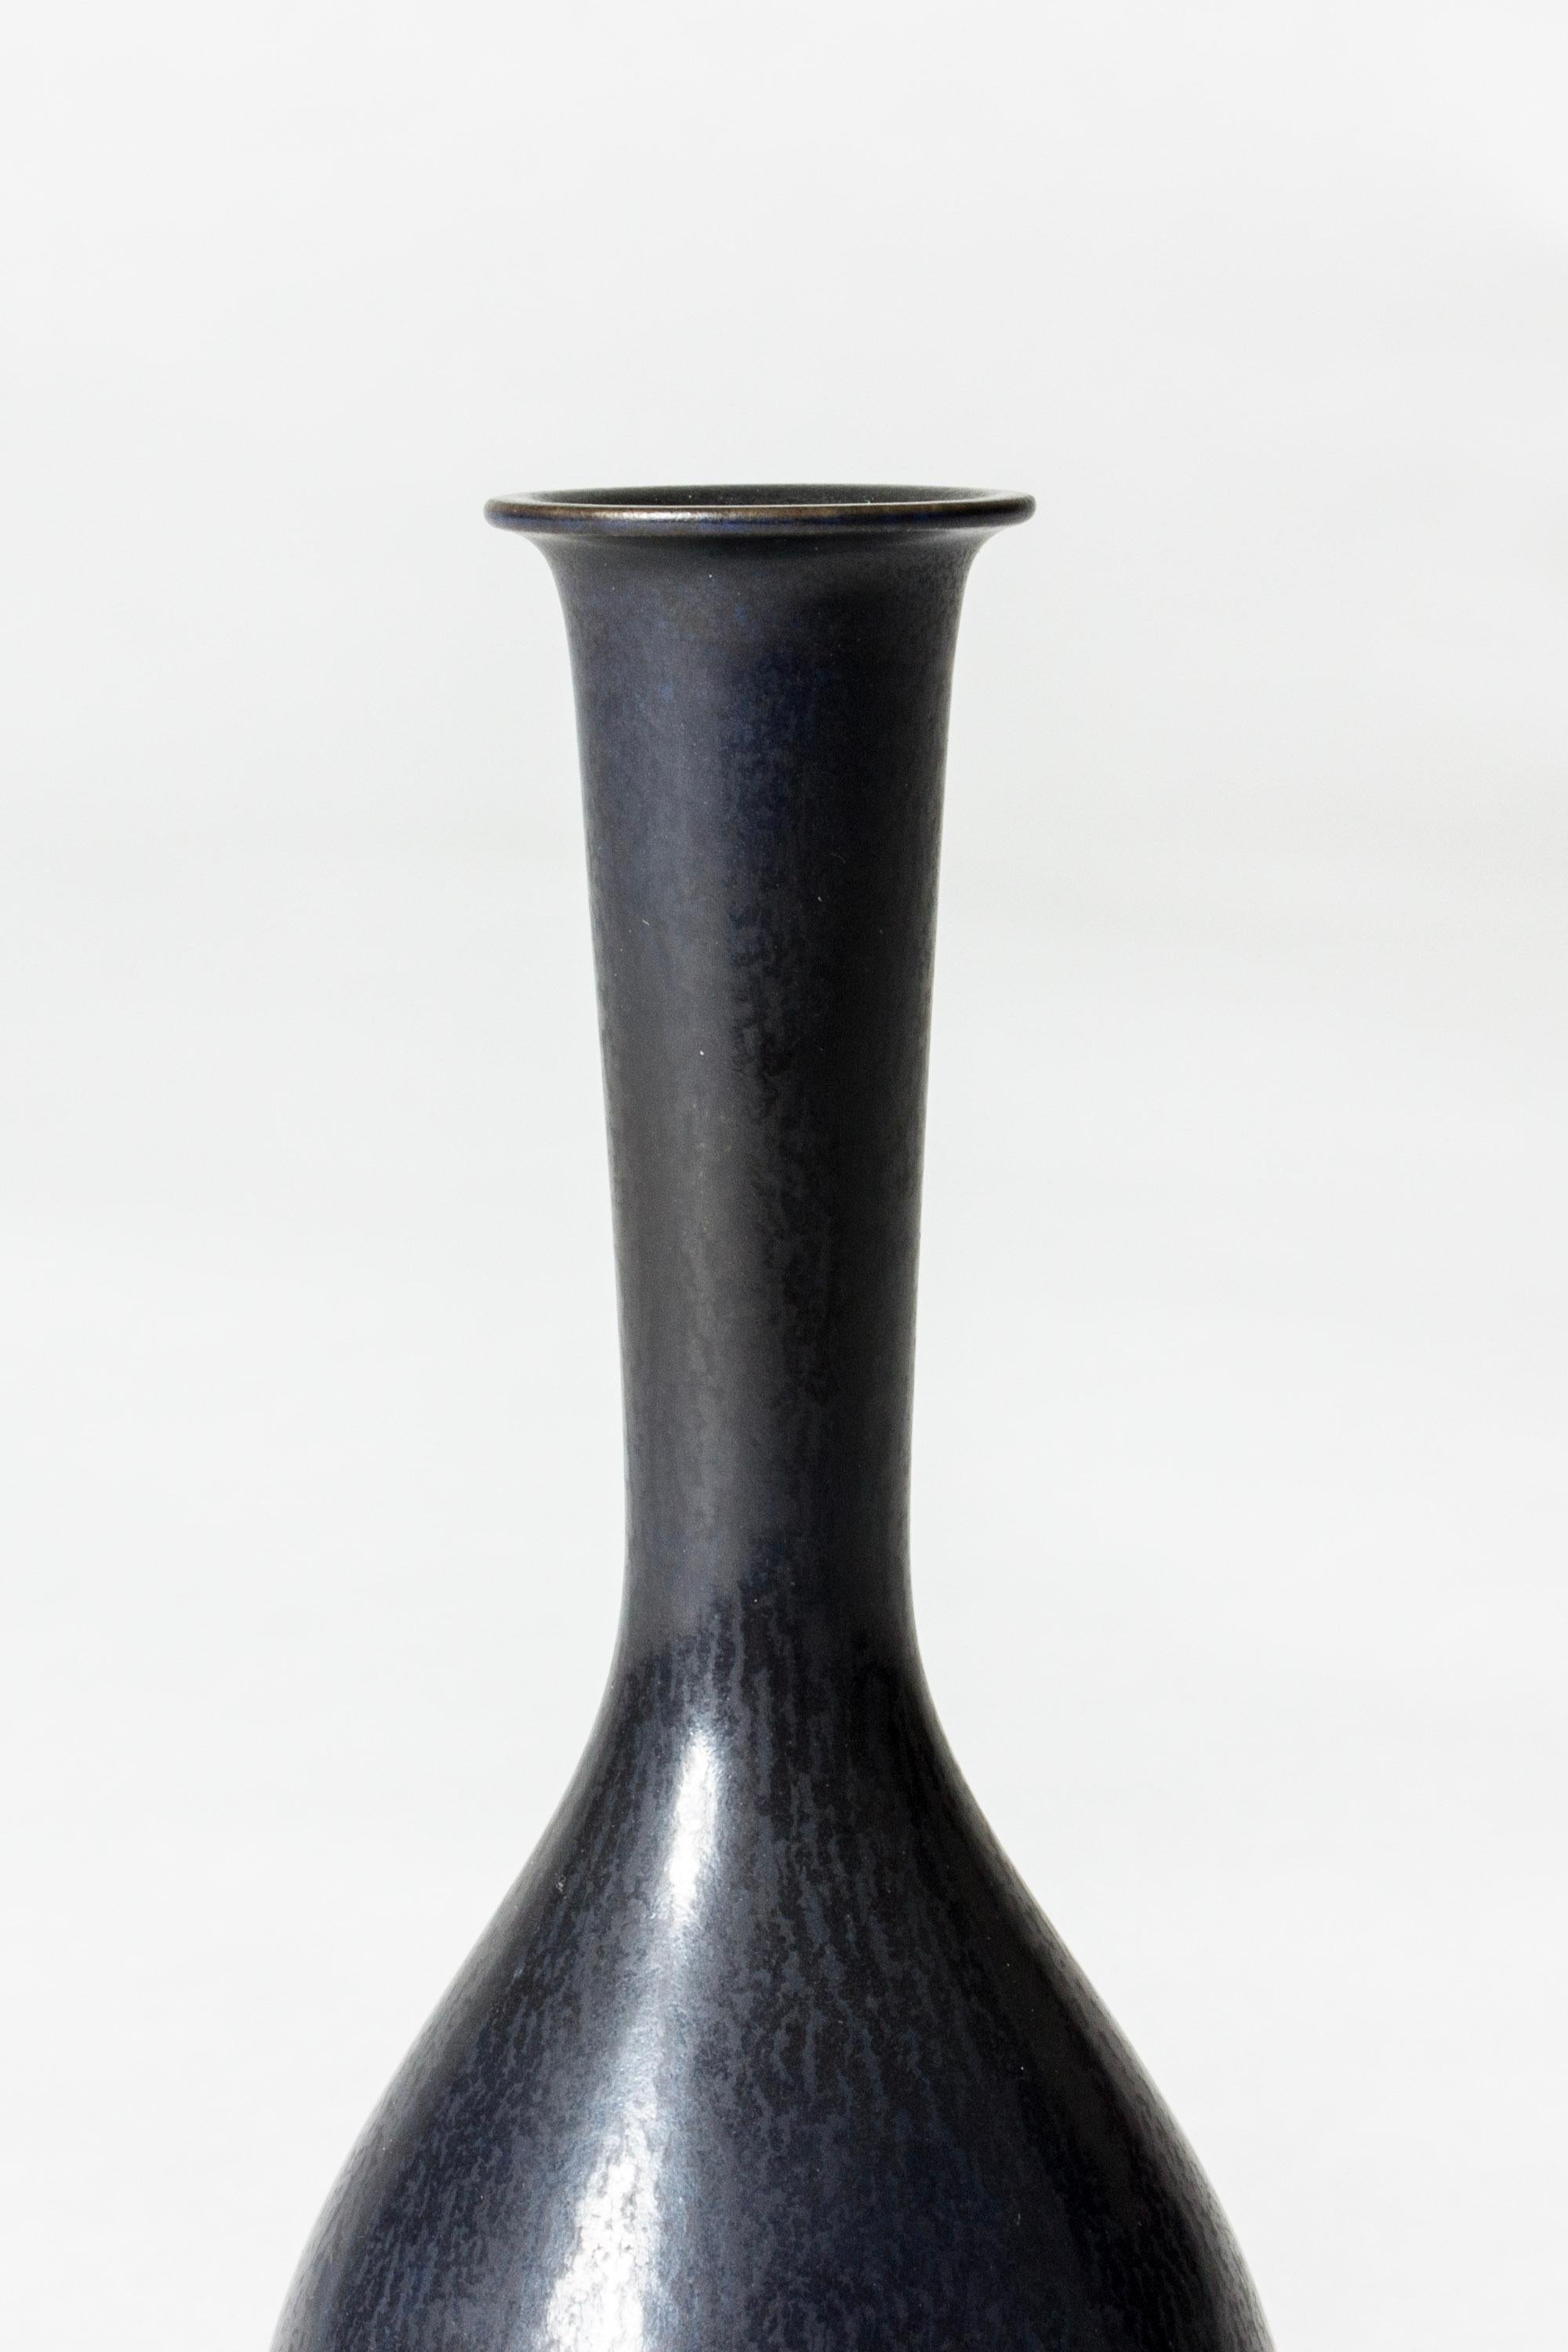 Small stoneware vase by Berndt Friberg, in a slender onion form with a long neck and flattened rim. Velvety midnight blue hare’s fur glaze.

Berndt Friberg was a Swedish ceramicist, renowned for his stoneware vases and vessels for Gustavsberg. His